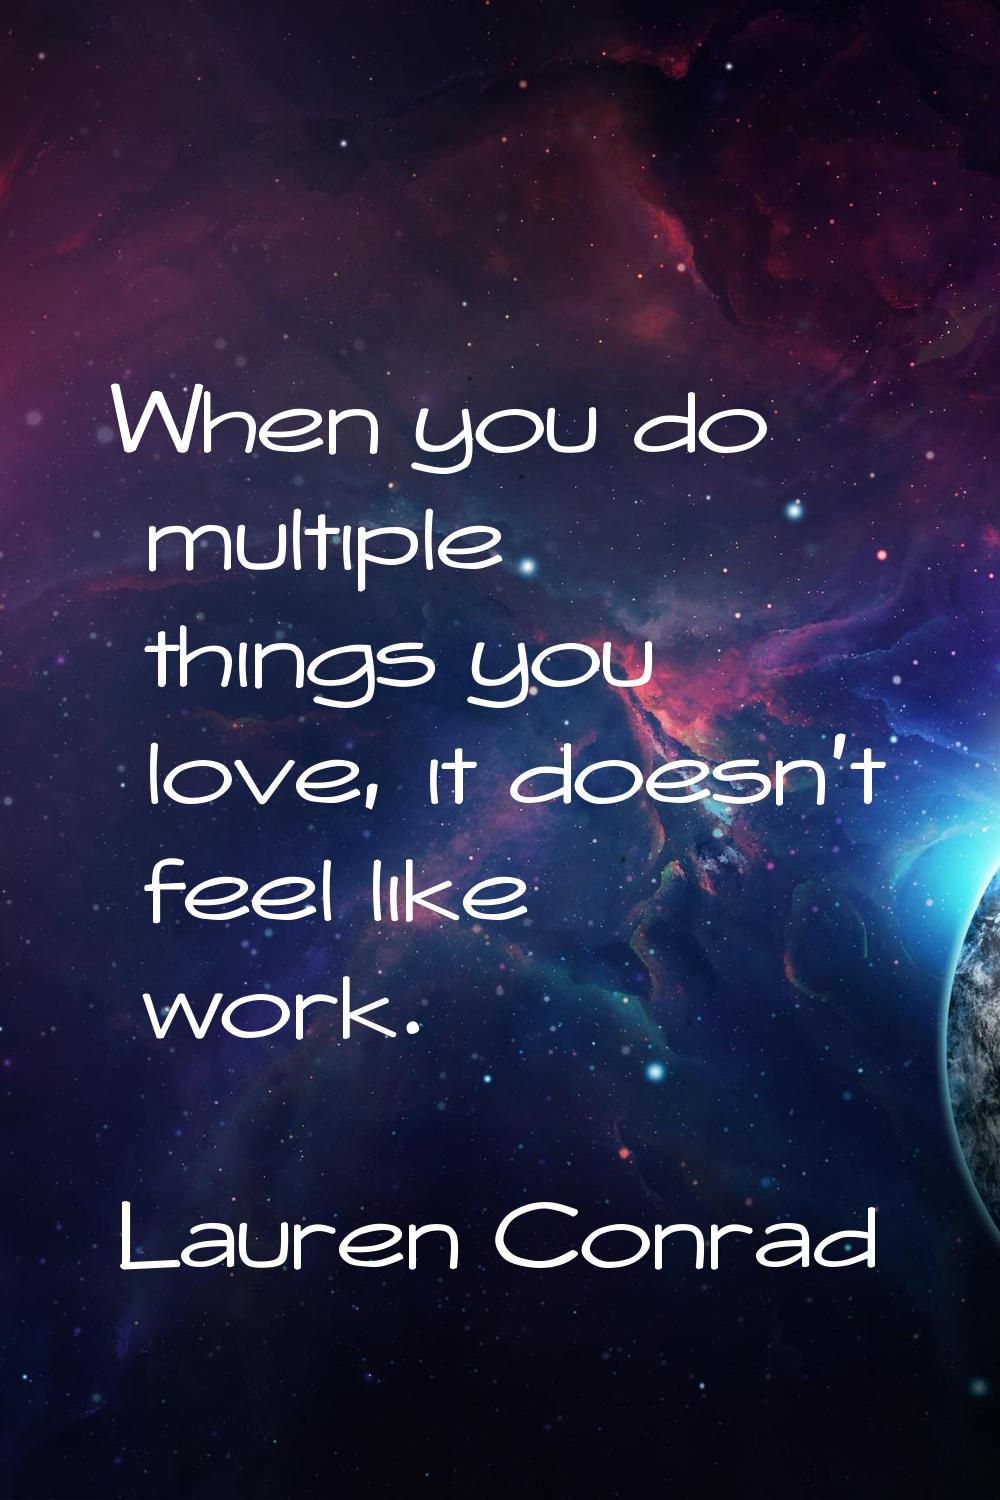 When you do multiple things you love, it doesn't feel like work.